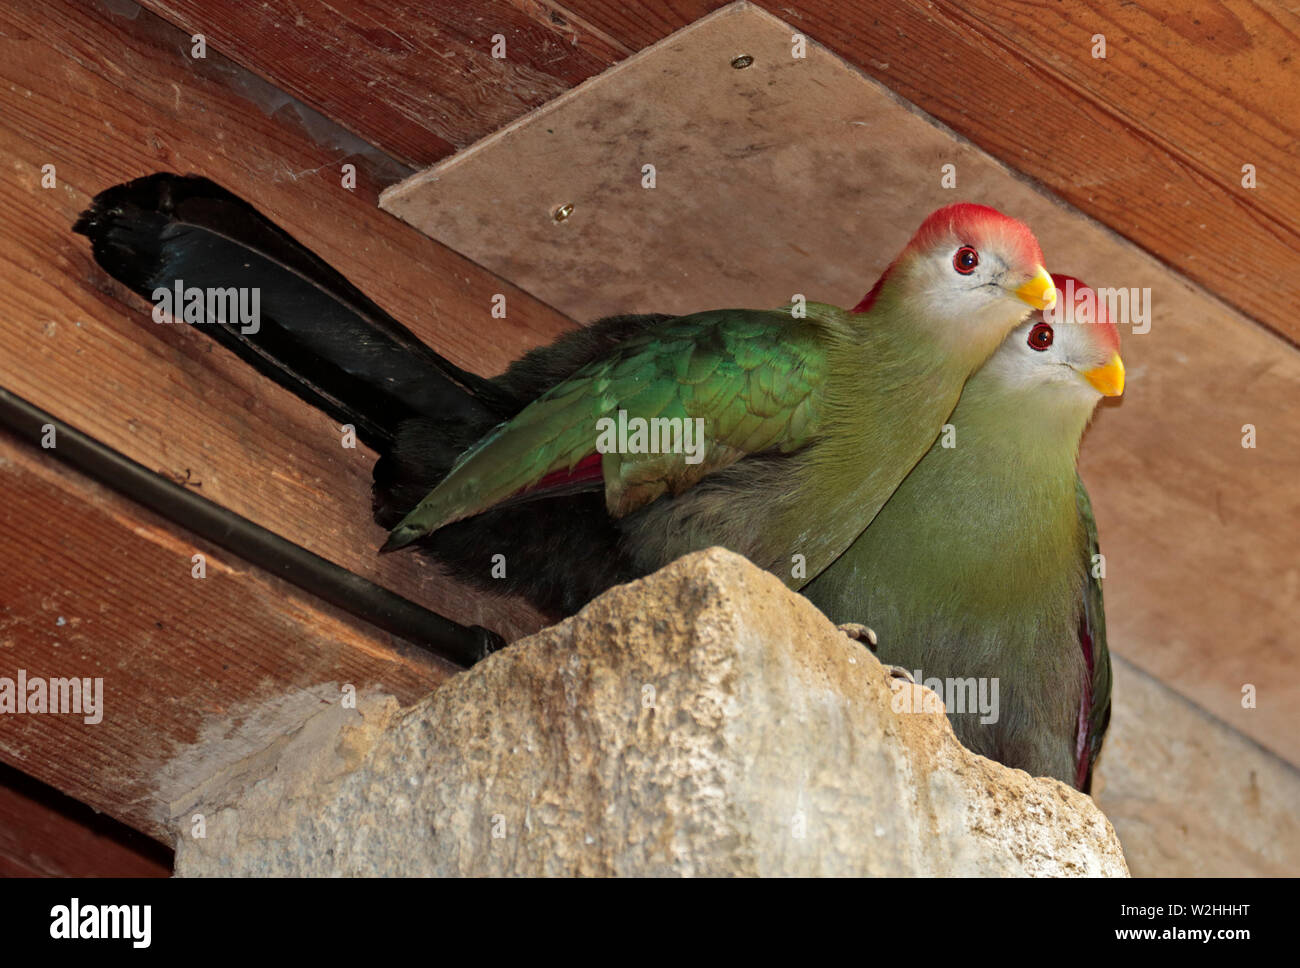 Red Crested Turacos (tauraco erythrolophus) Foto Stock